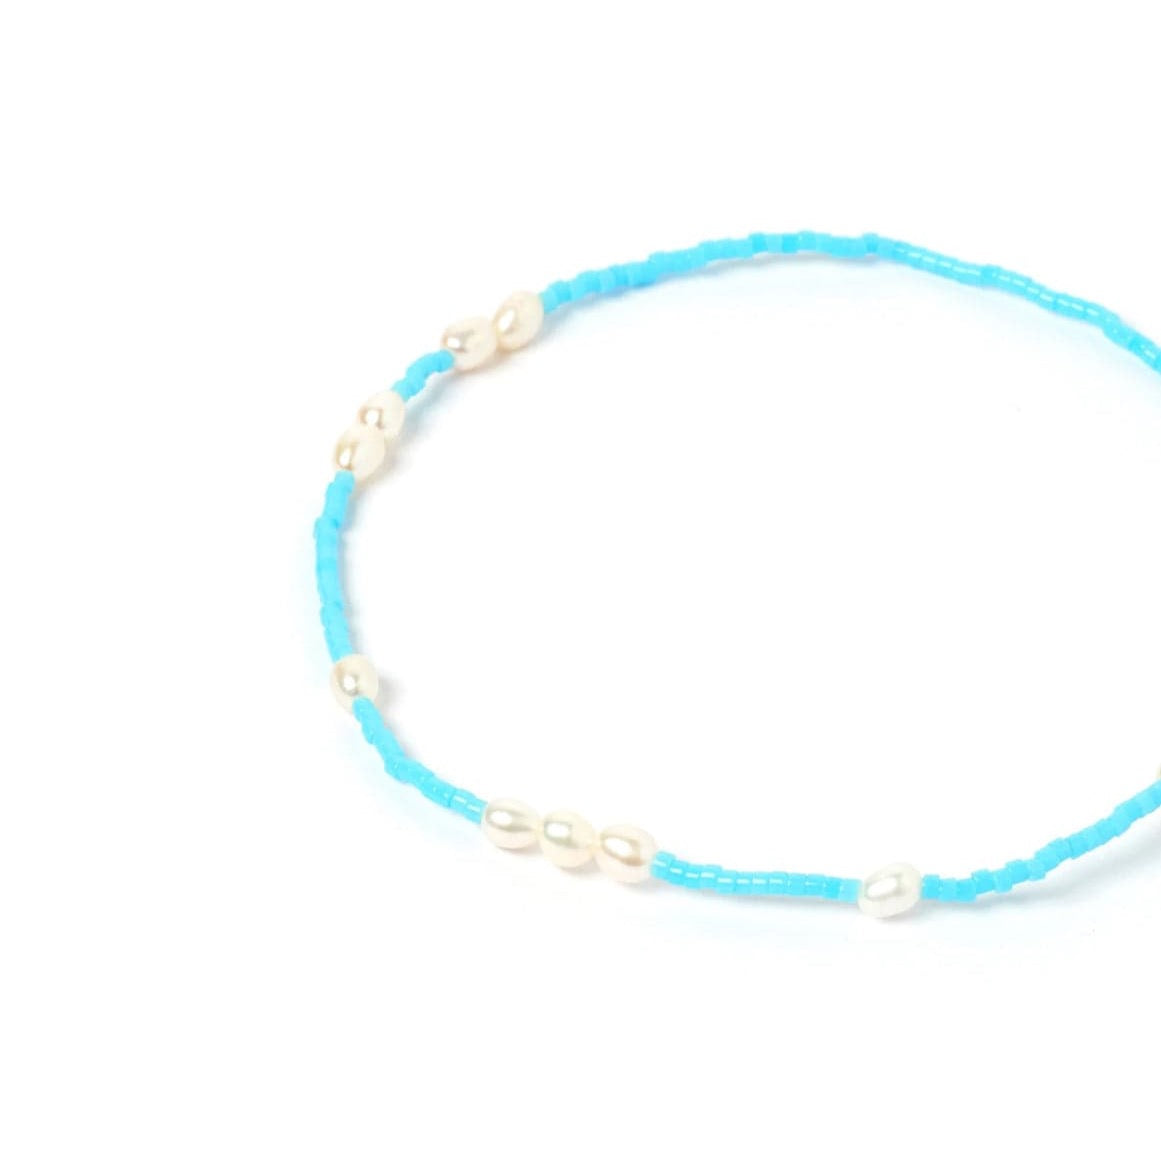 Poppy Pearl + Glass Bead Anklet Turquoise For Her by Arms of Eve